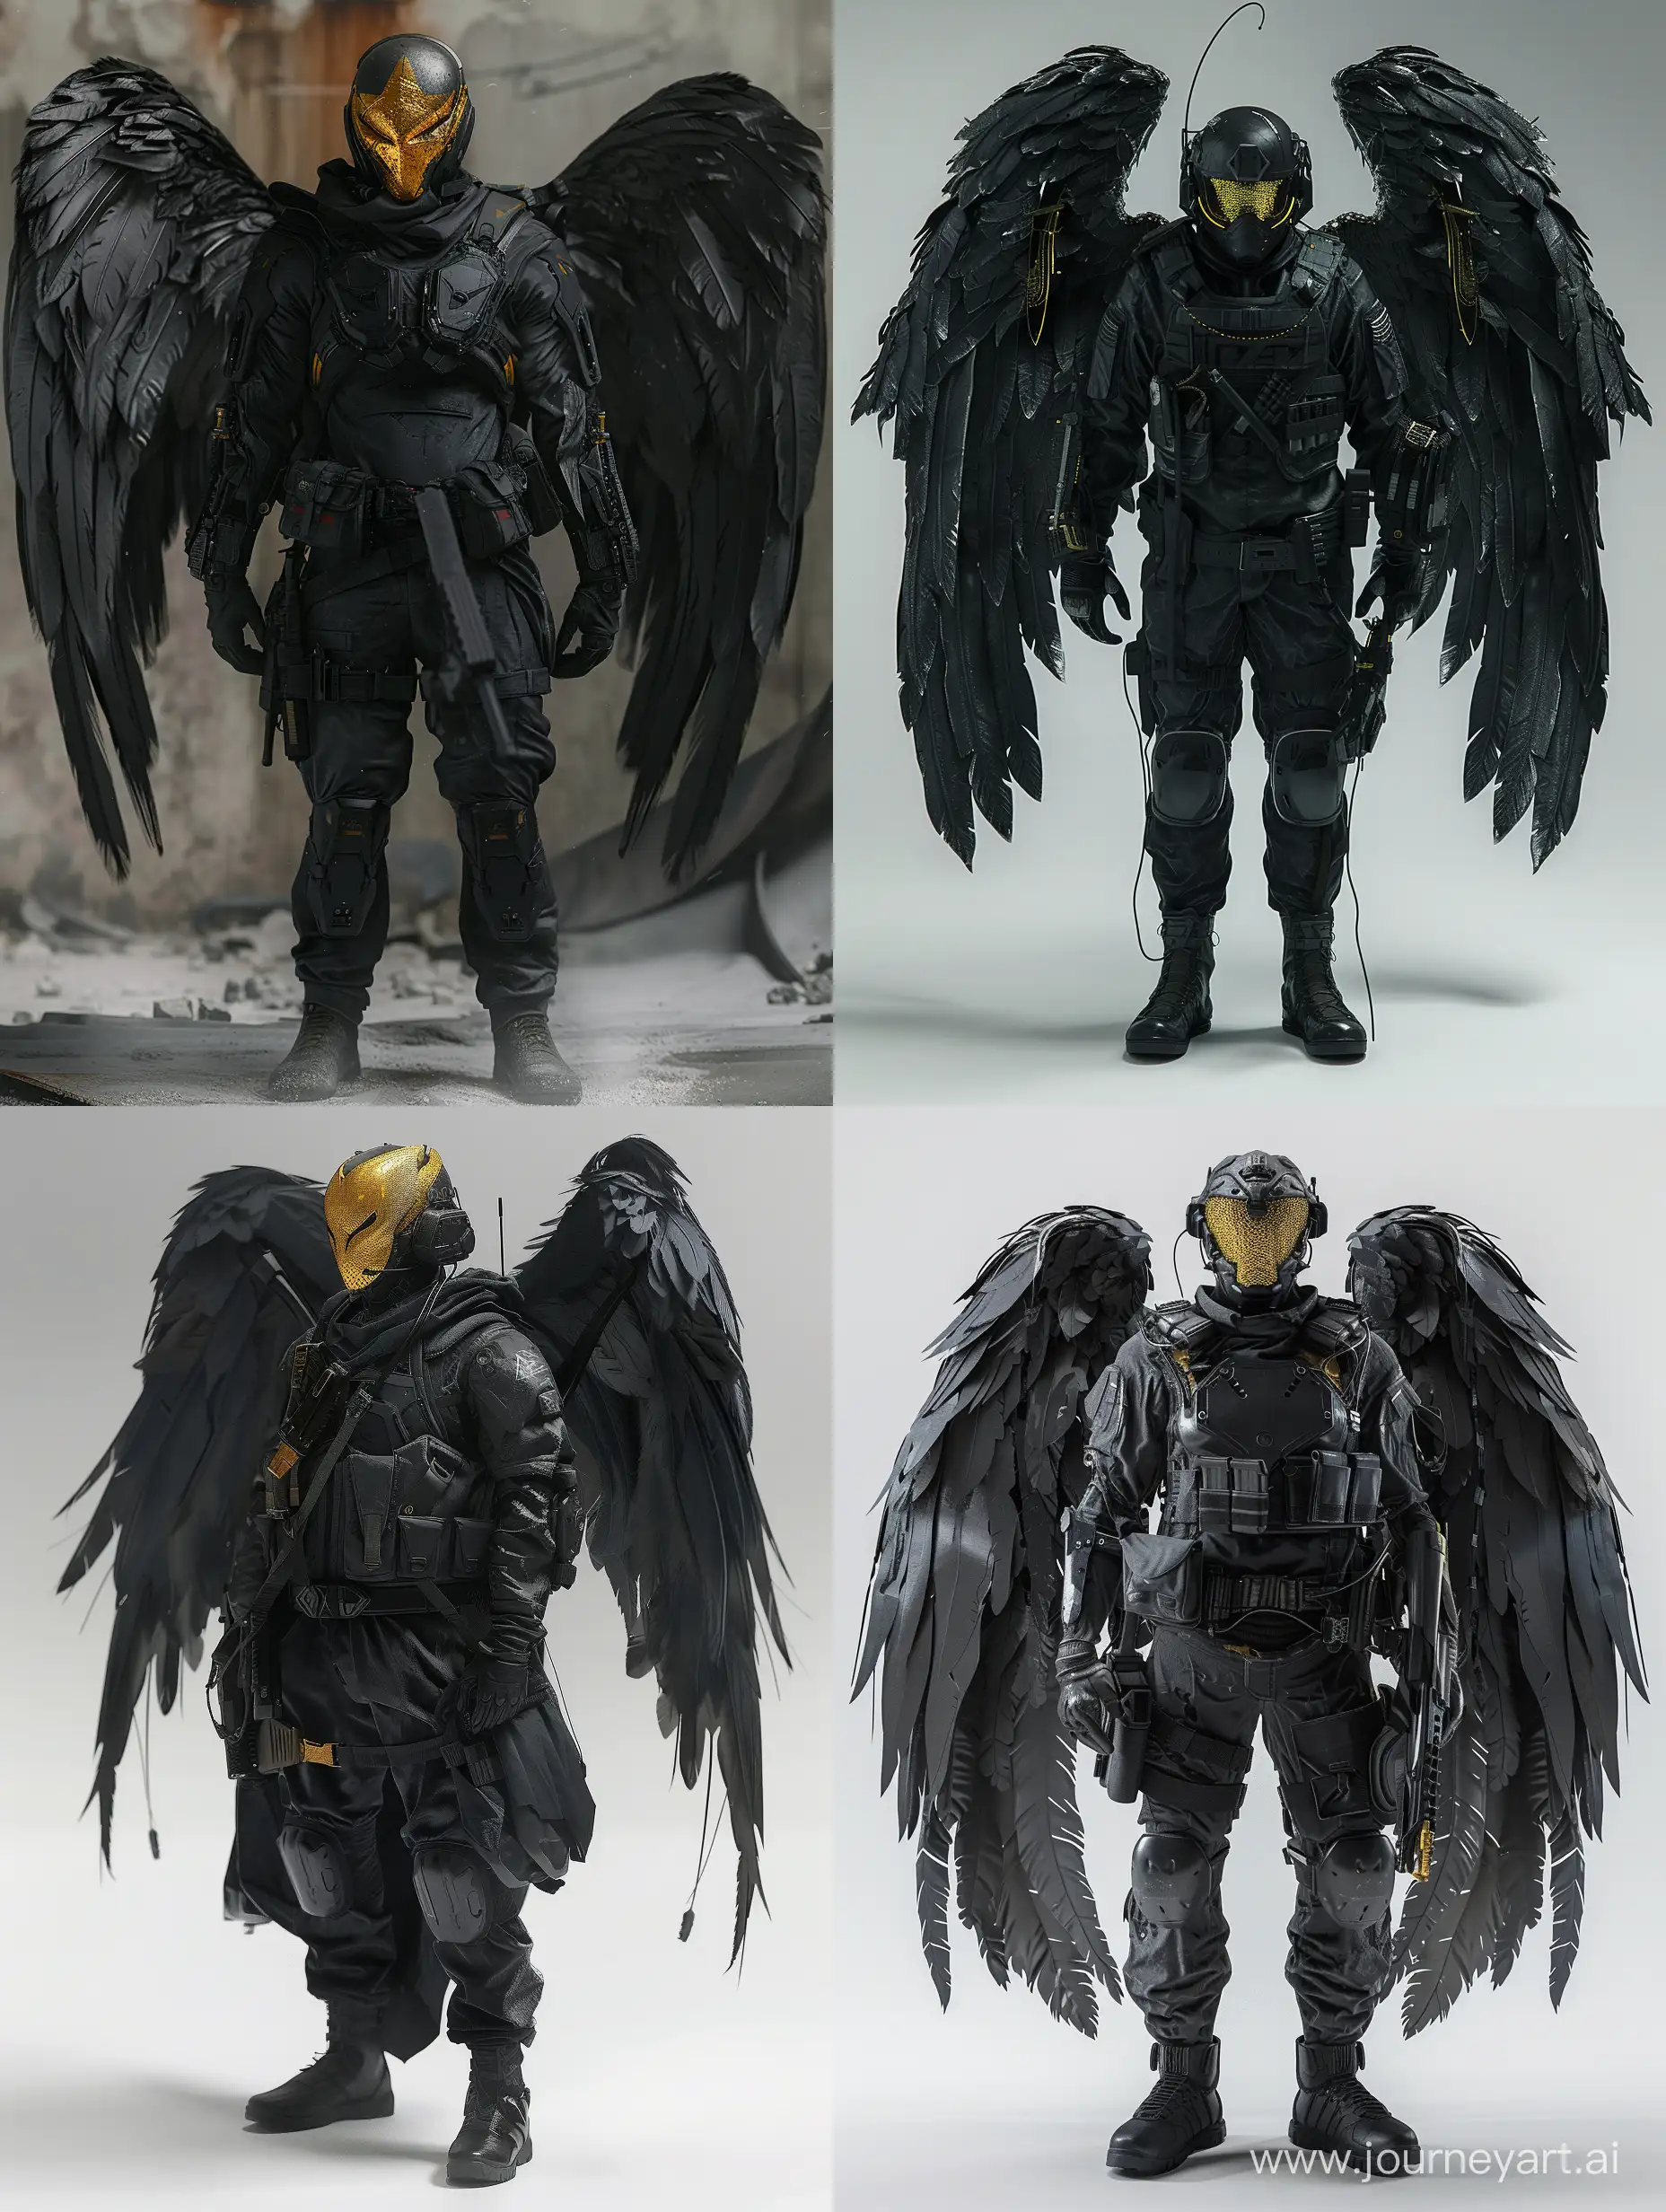 Futuristic-Male-Soldier-with-Dark-Angel-Aesthetics-and-Cyberpunk-Vibes